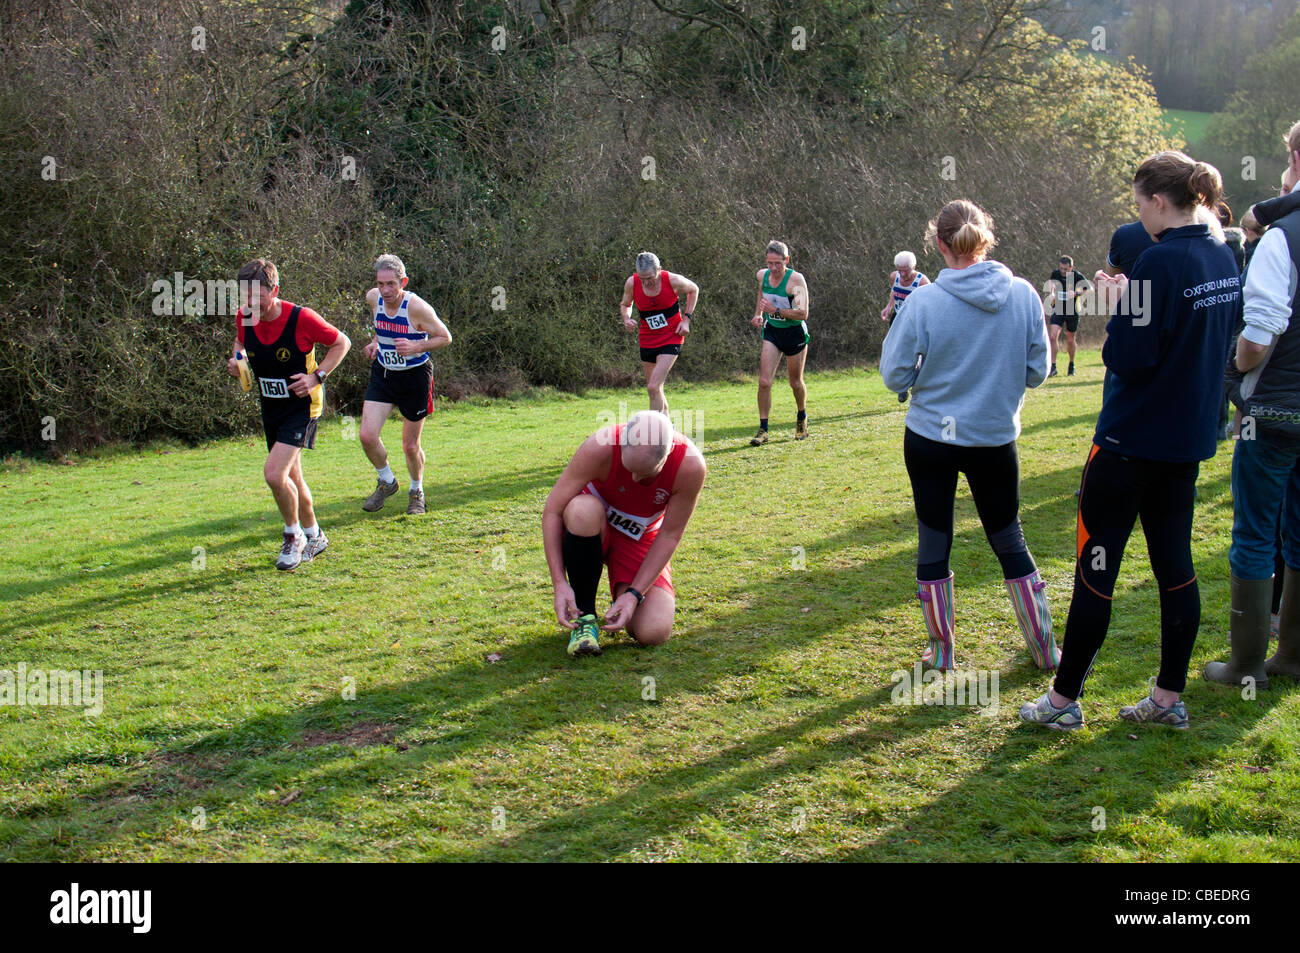 Man doing up shoelace during cross country race Stock Photo